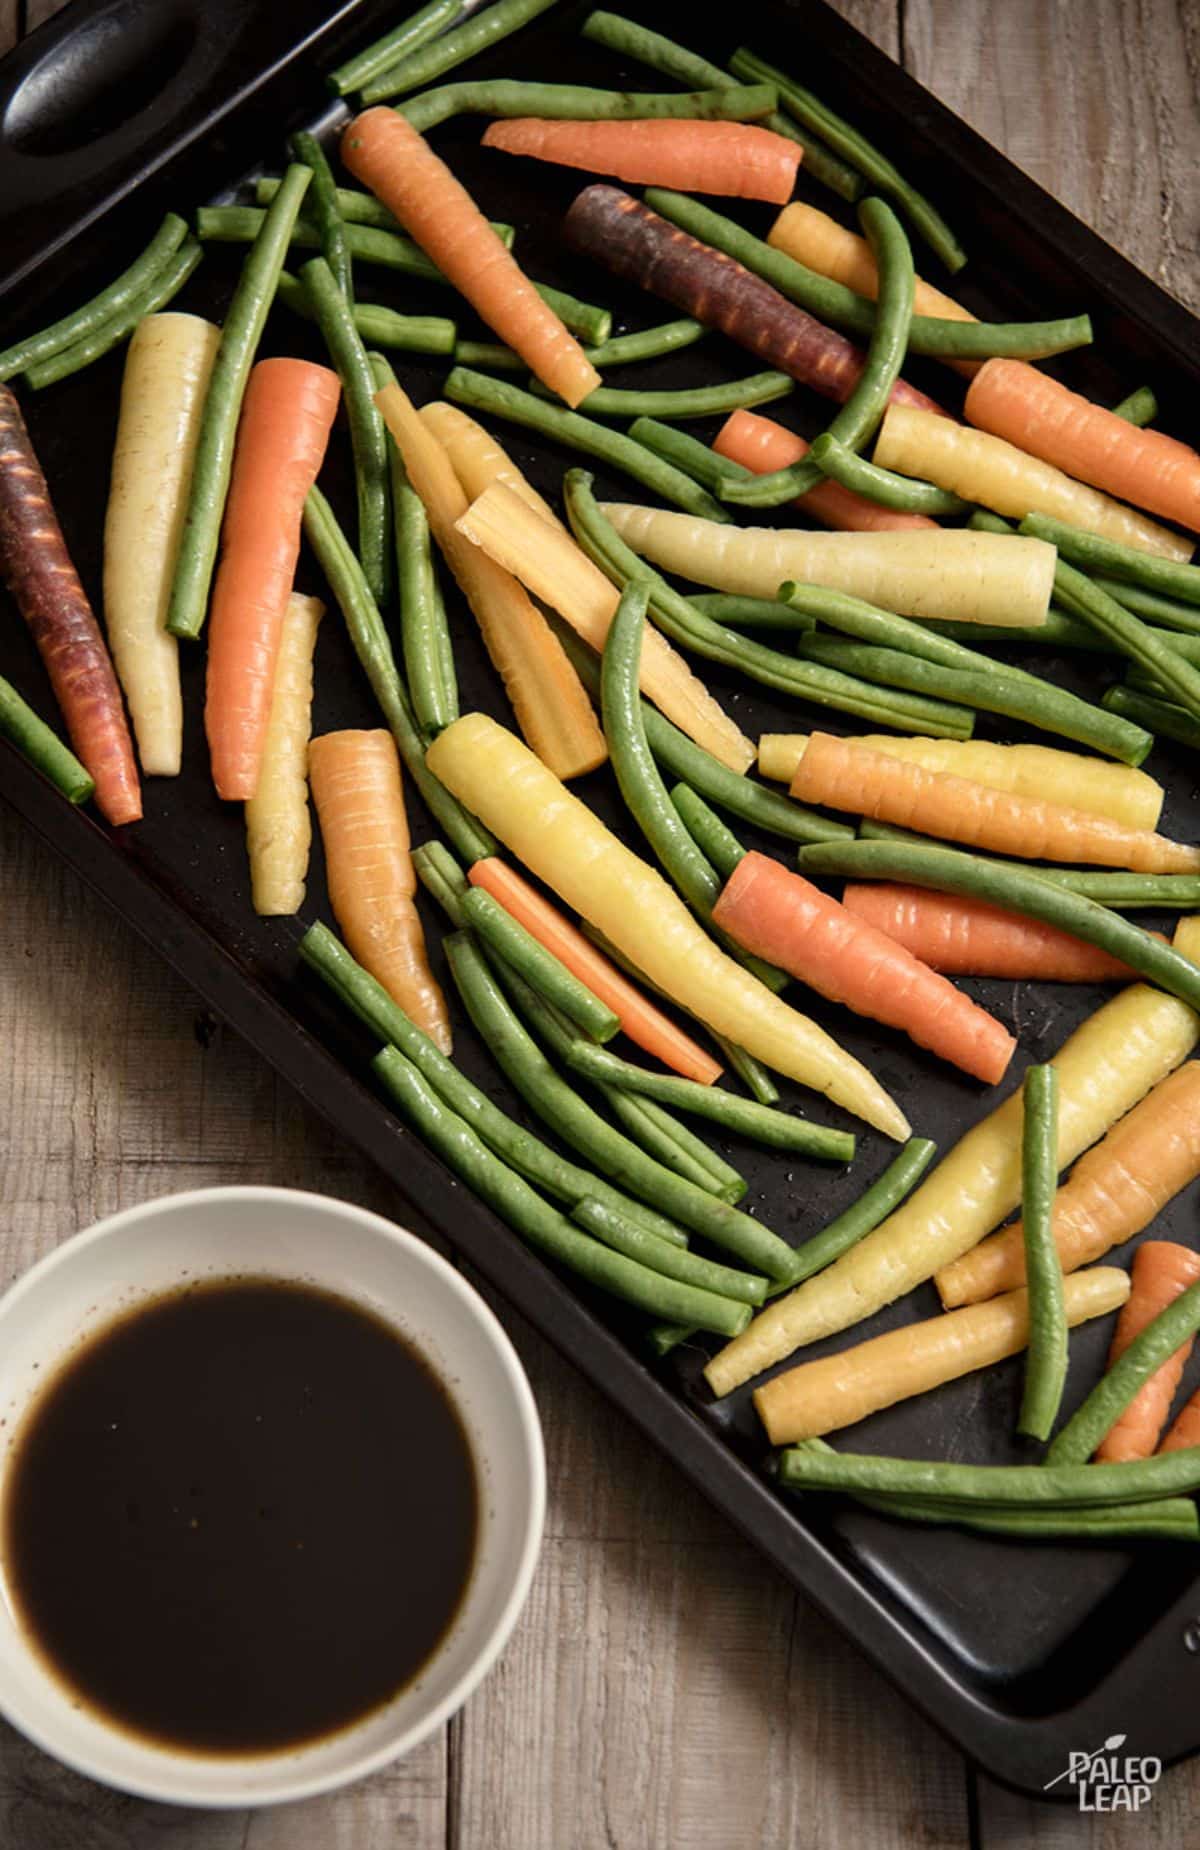 Balsamic Roasted Carrots and Green Beans Recipe Preparation